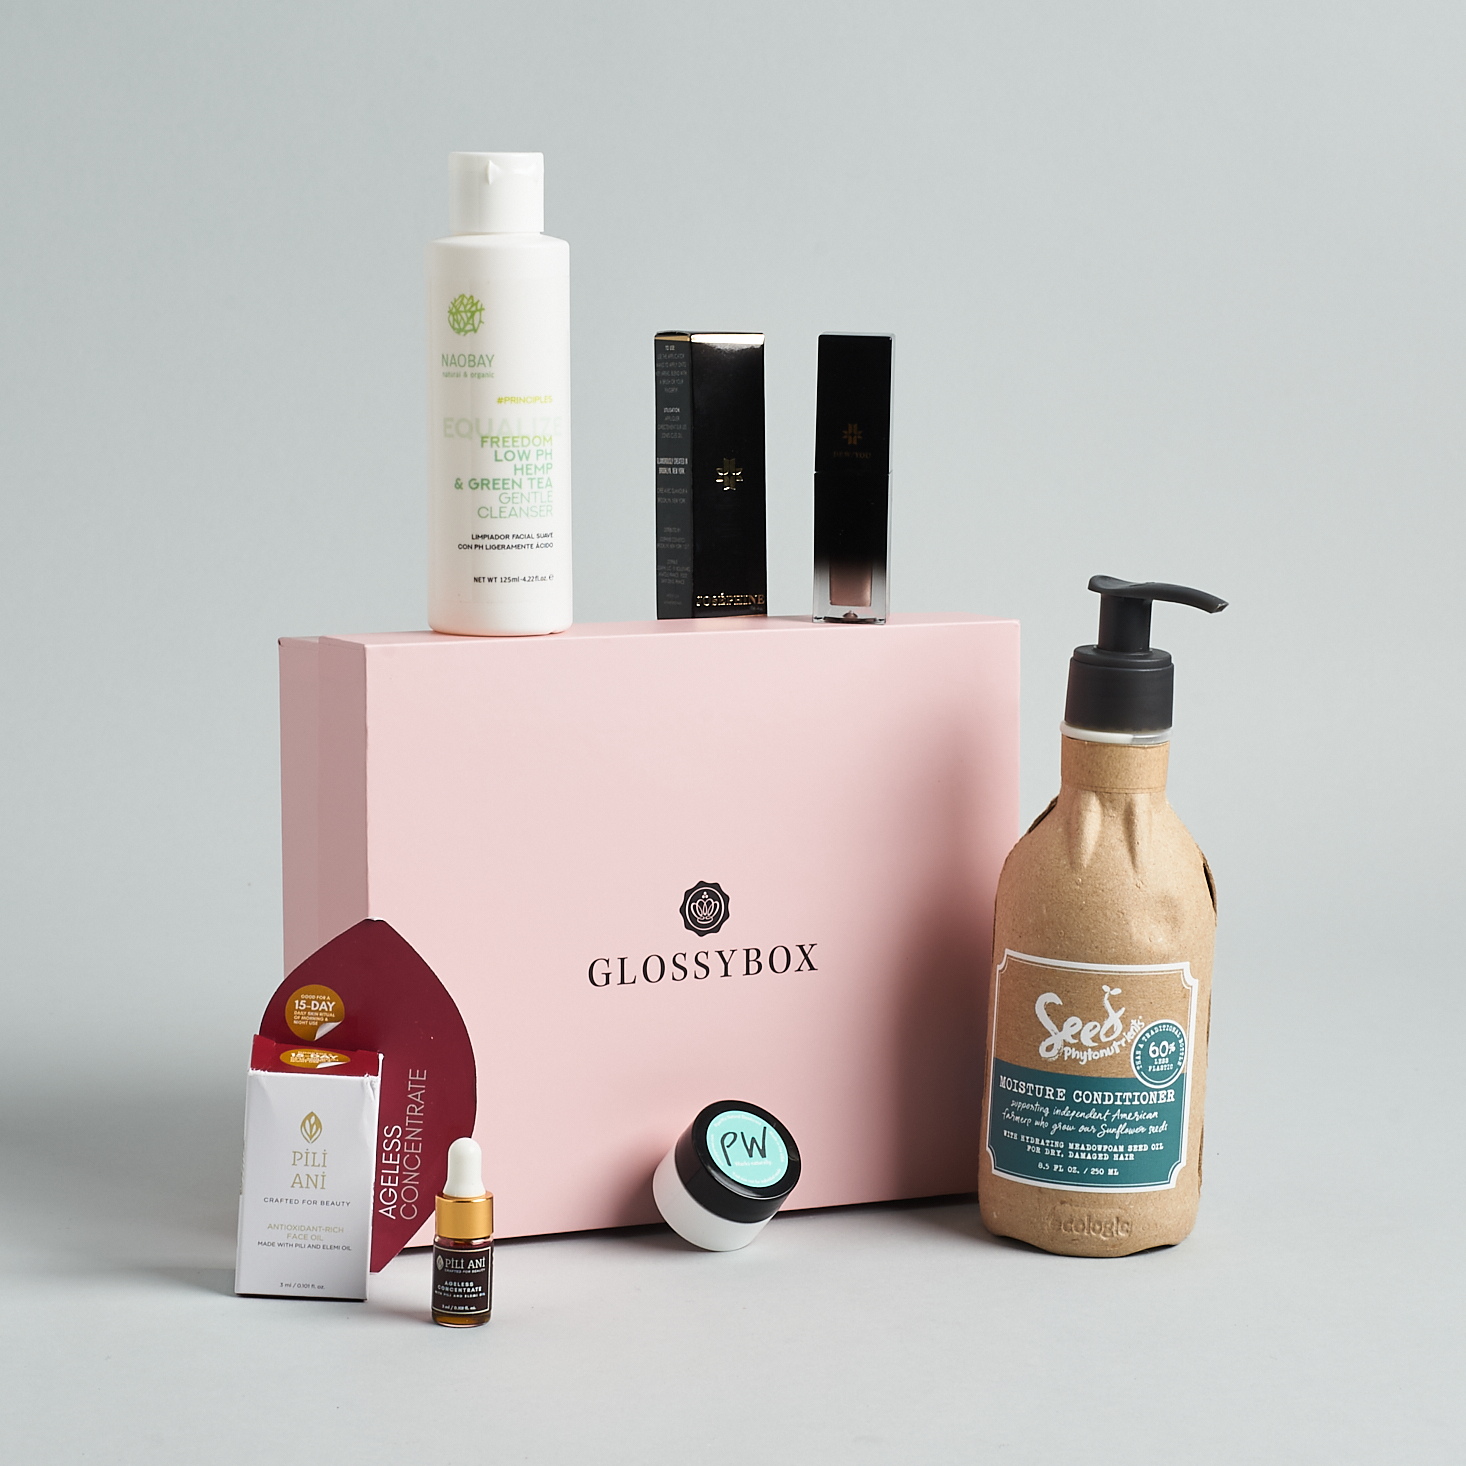 MSA Exclusive: Get Your First GlossyBox for Only $1 With a 12-Month Subscription